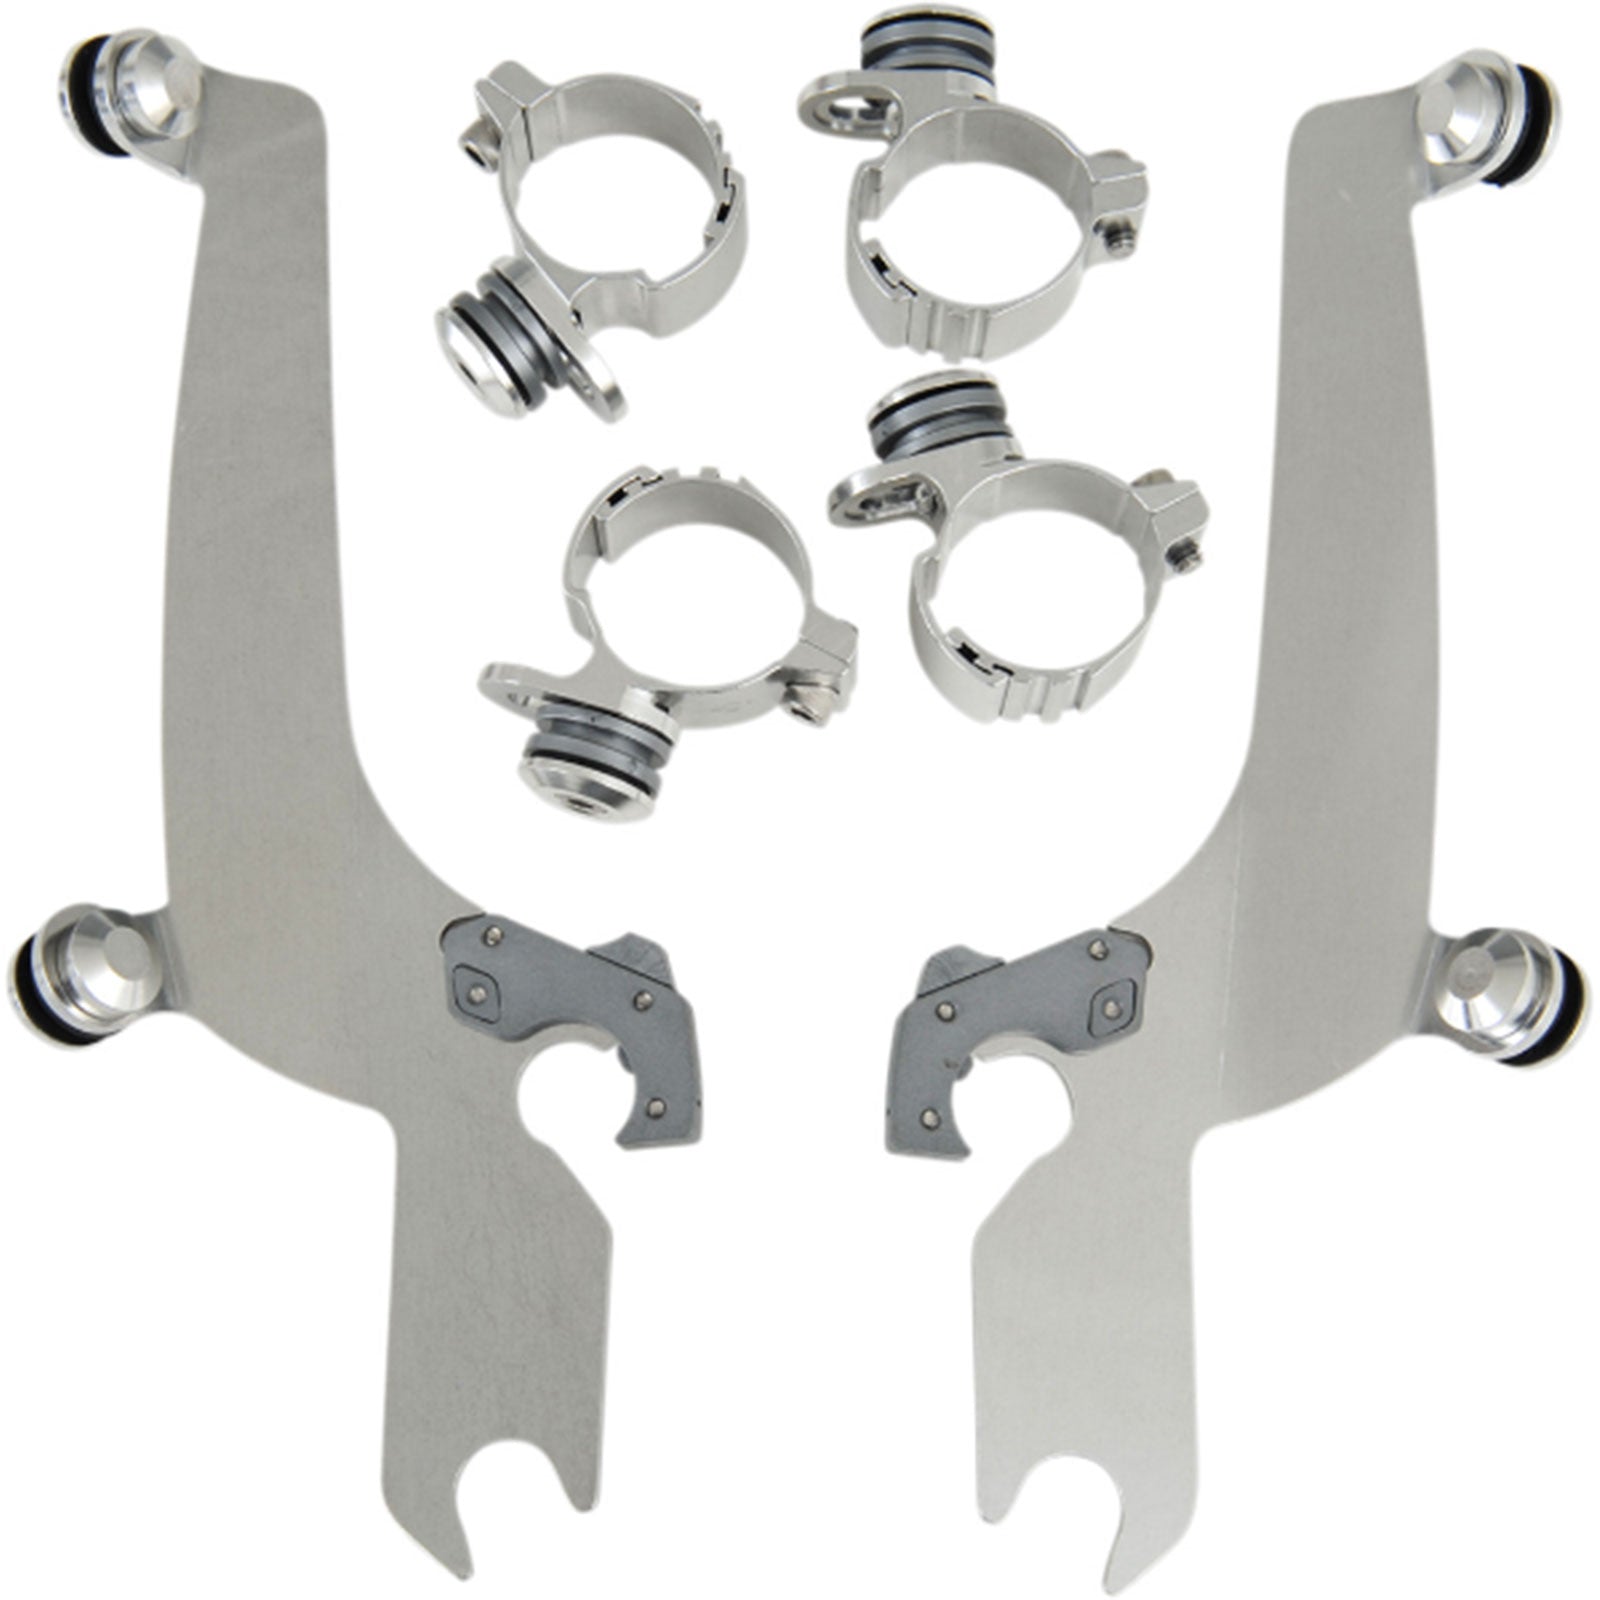 Memphis Shades Sportshield Trigger-Lock Complete Wide Mount Kit Motorcycle Accessories-2320